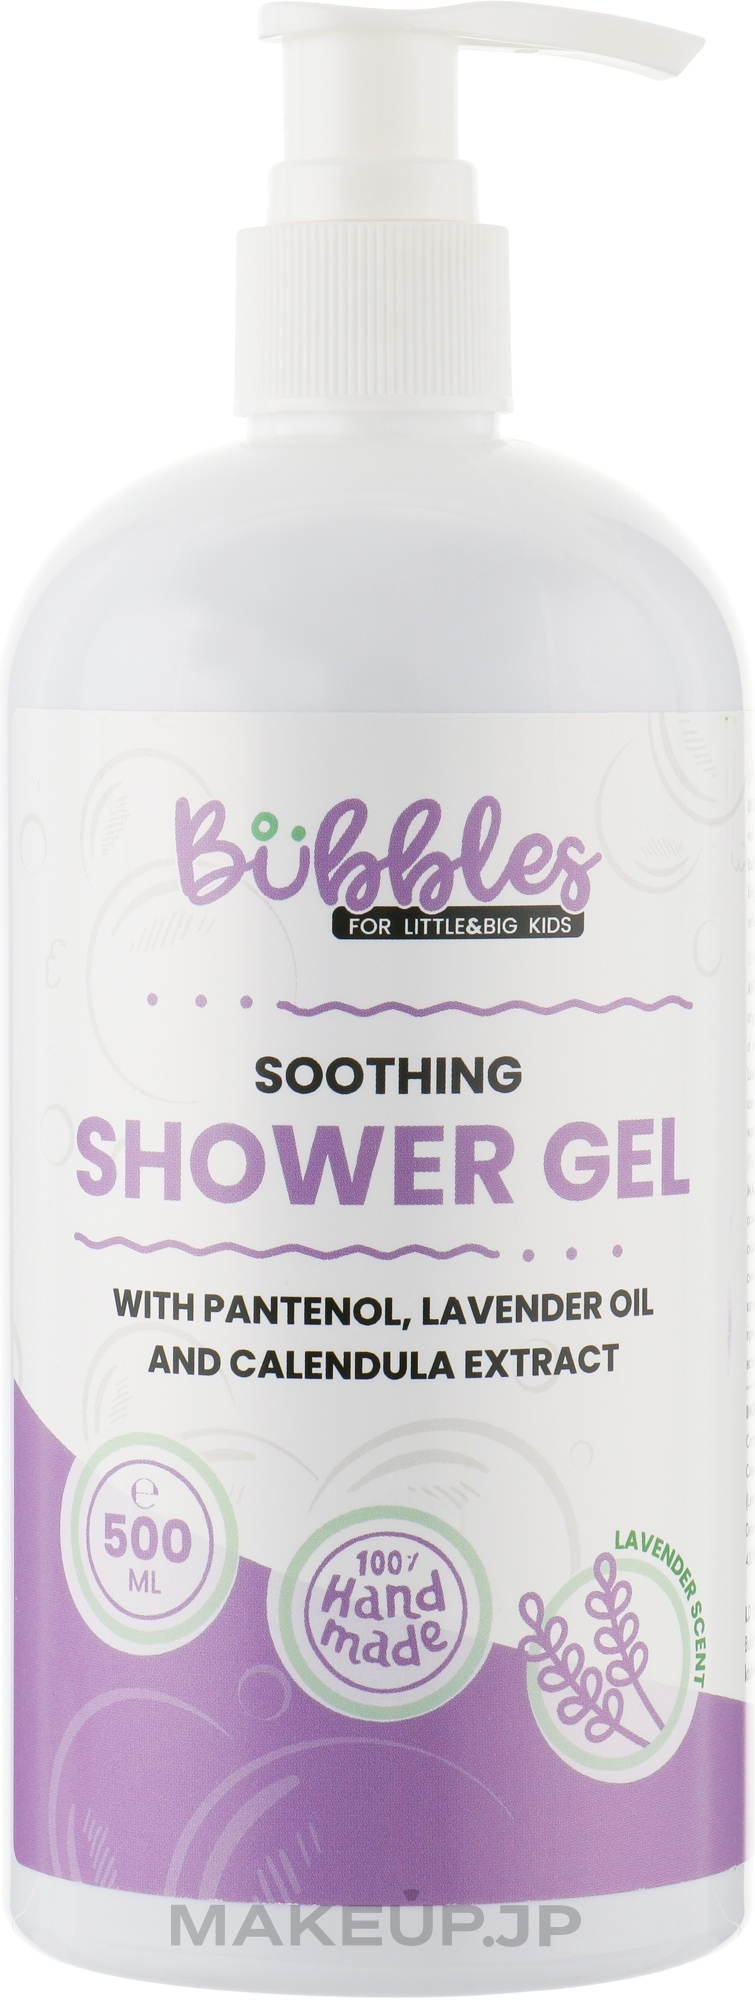 Soothing Shower Gel - Bubbles Soothing Shower Gel — photo 500 ml